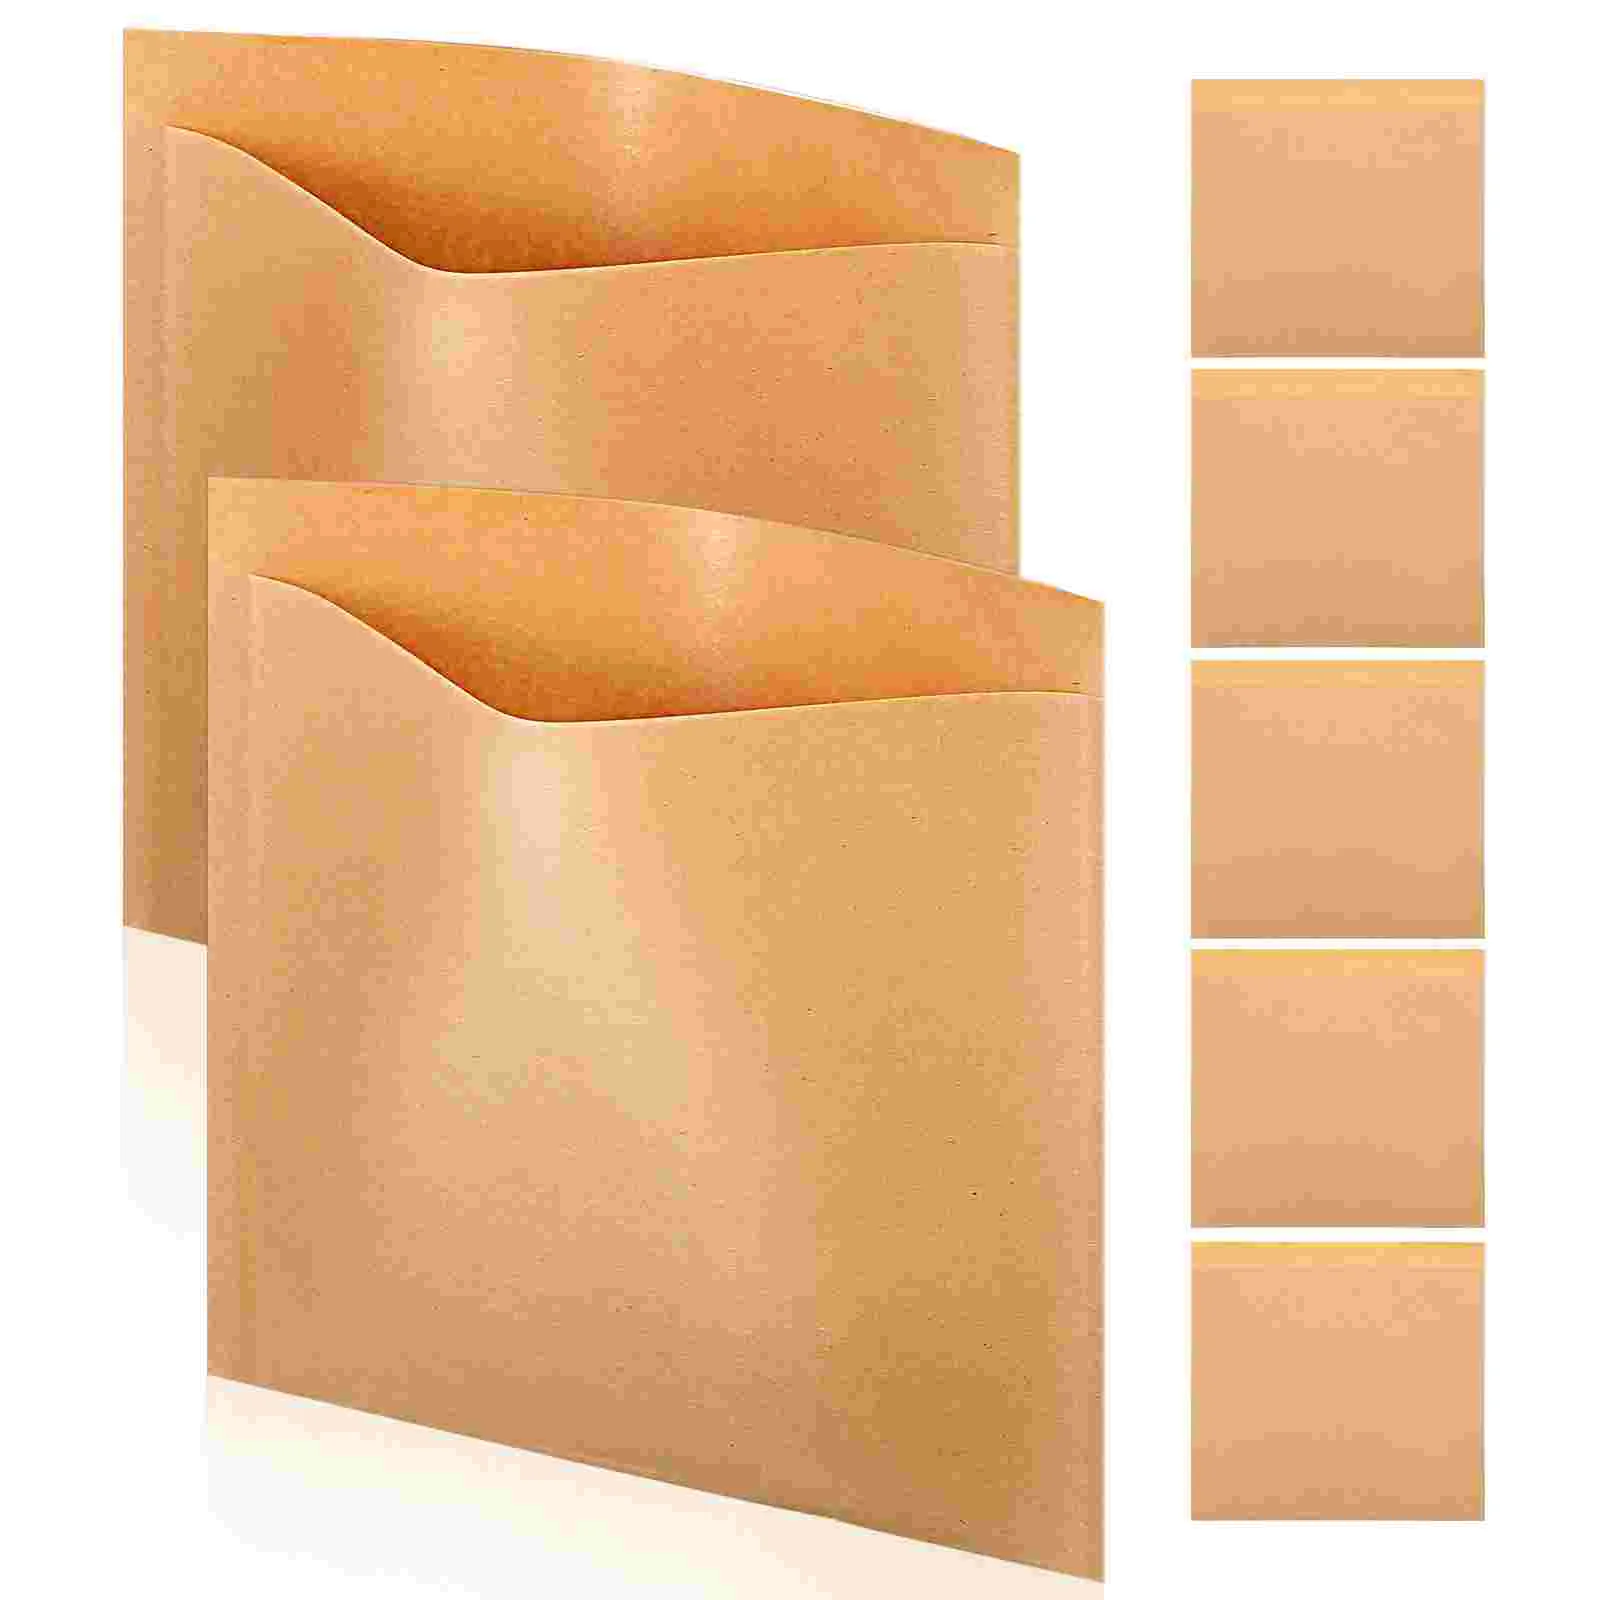 

Bags Paper Sandwich Bag Bakery Wax Kraft Cookie Grease Deli Wrap Wrapping Resistant Oil Sheets Gift Waxed Treat Proof Bread